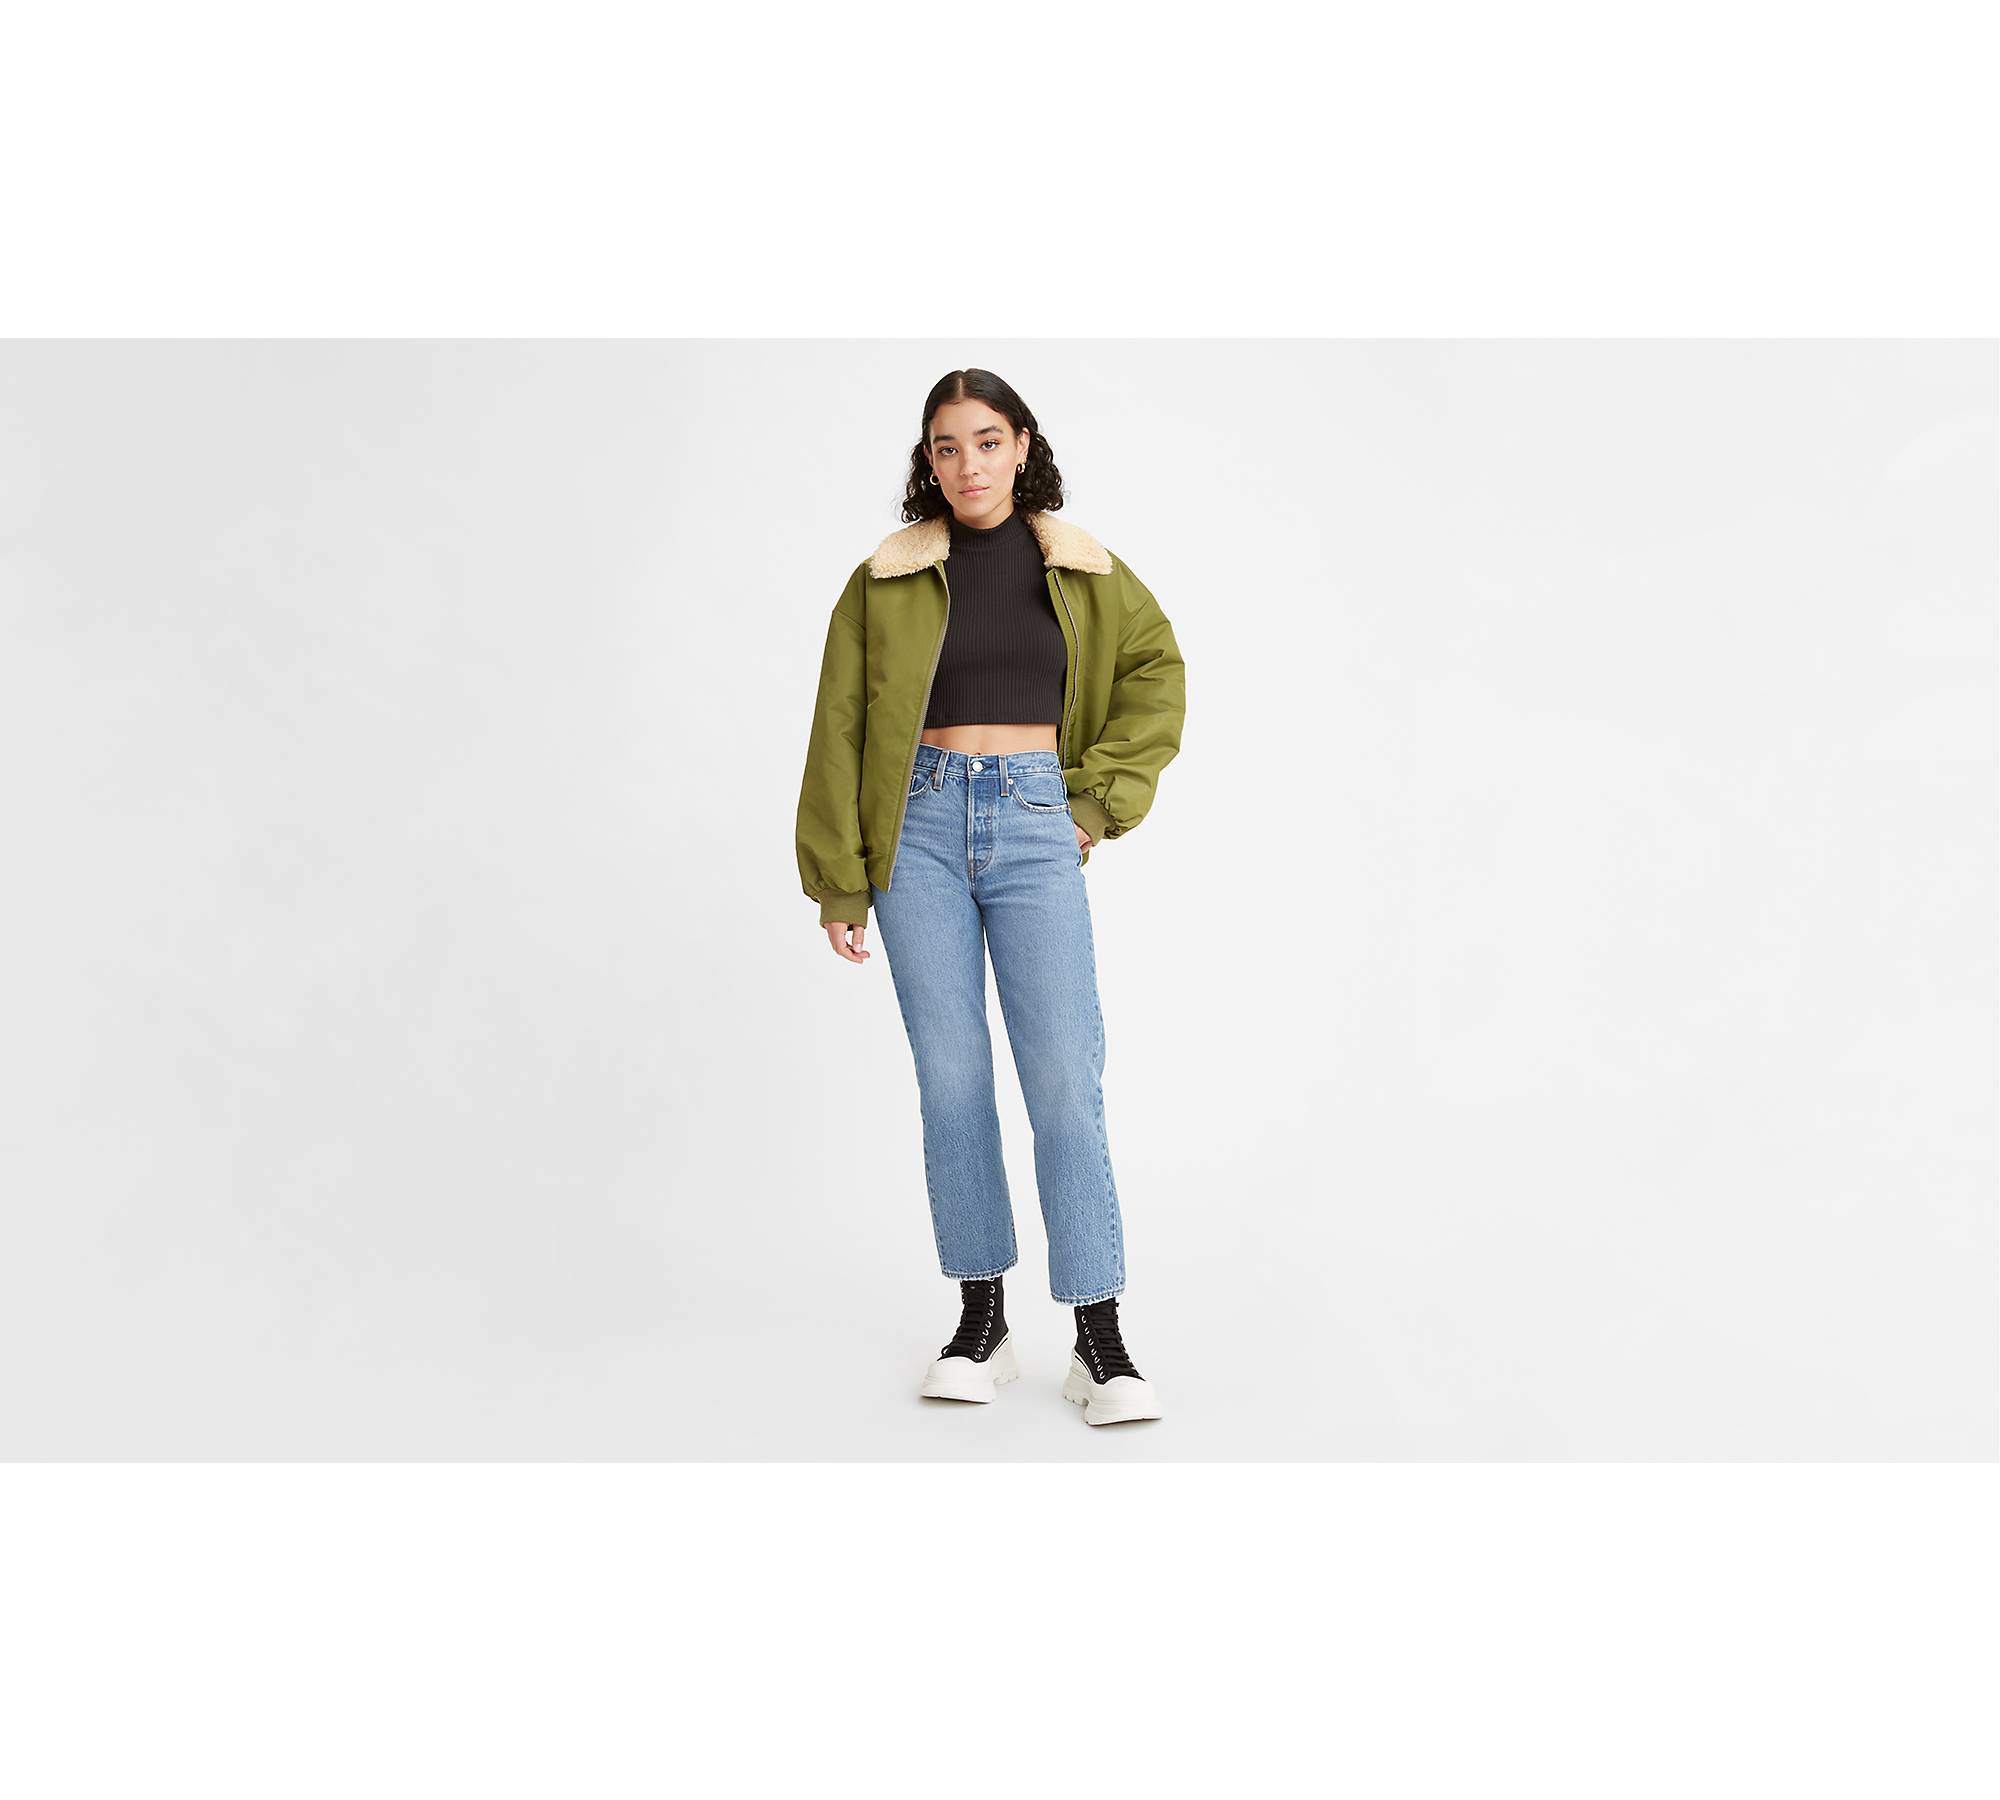 GenesinlifeShops Germany - Levi's Women's Wedgie Straight Jeans Forget Me  Not Forever - Concepts Sport Women's Boston Eagles Mainstream Shorts Heron  Preston